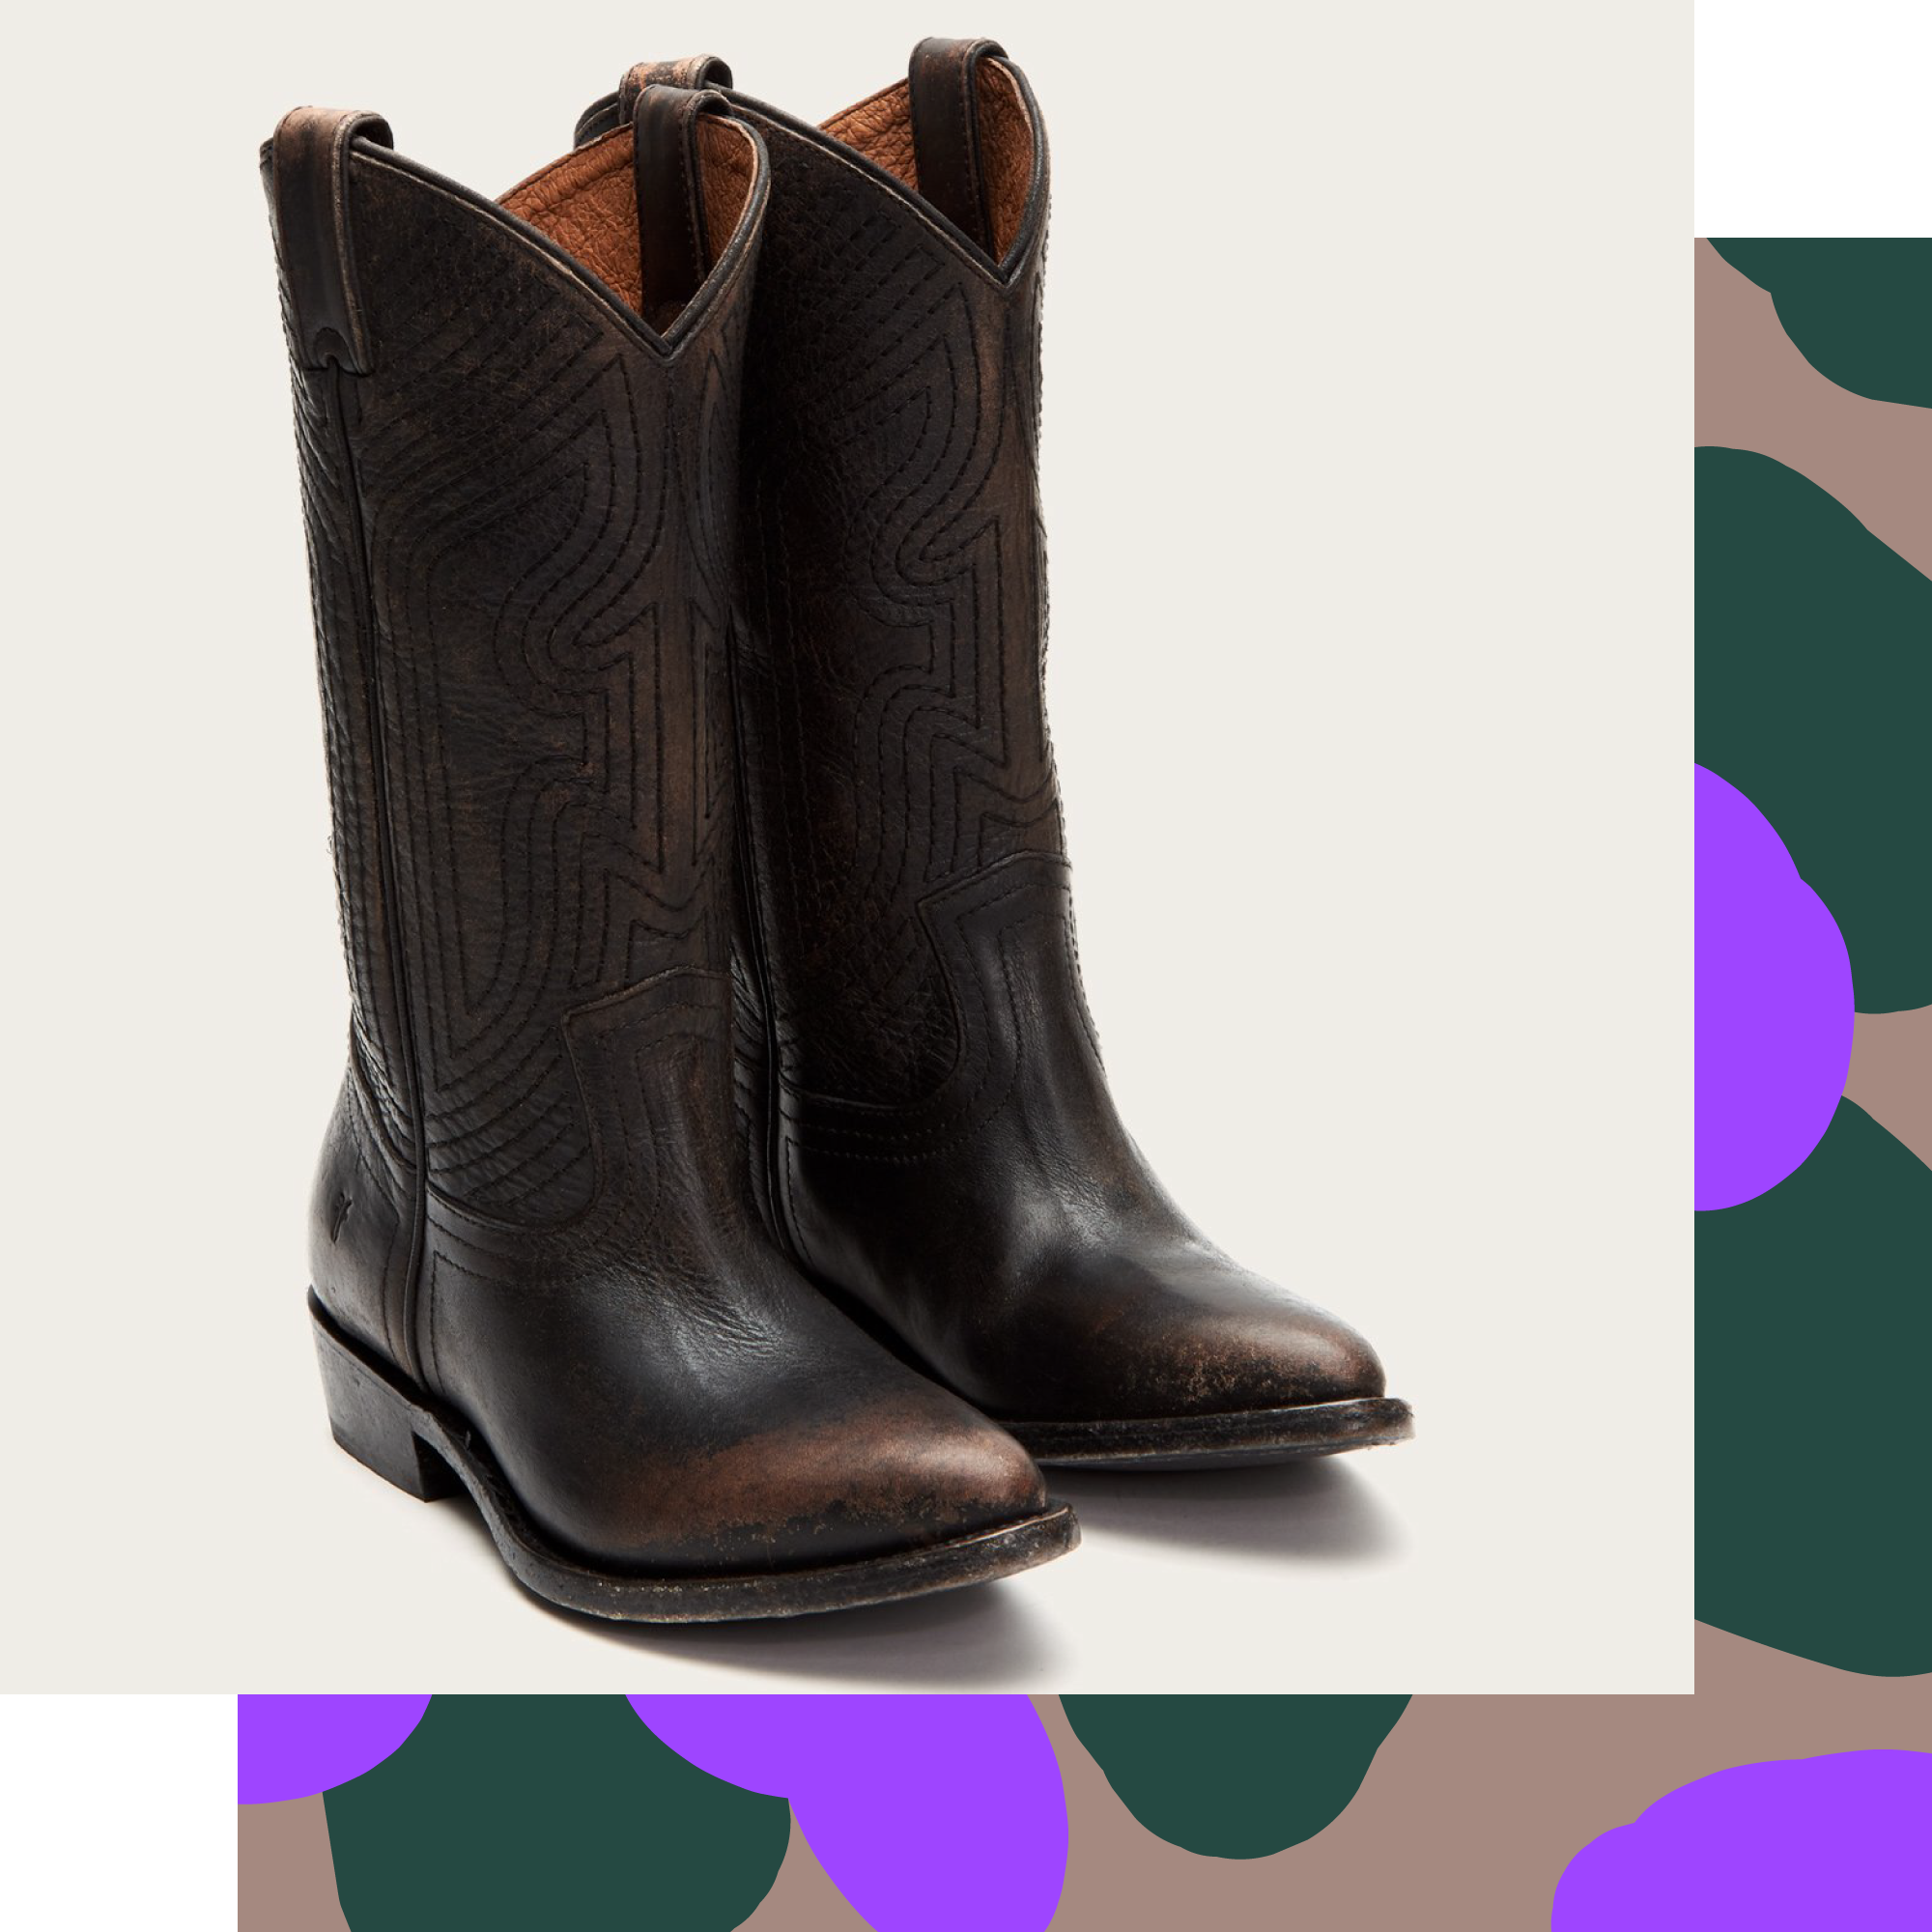 henley western boots